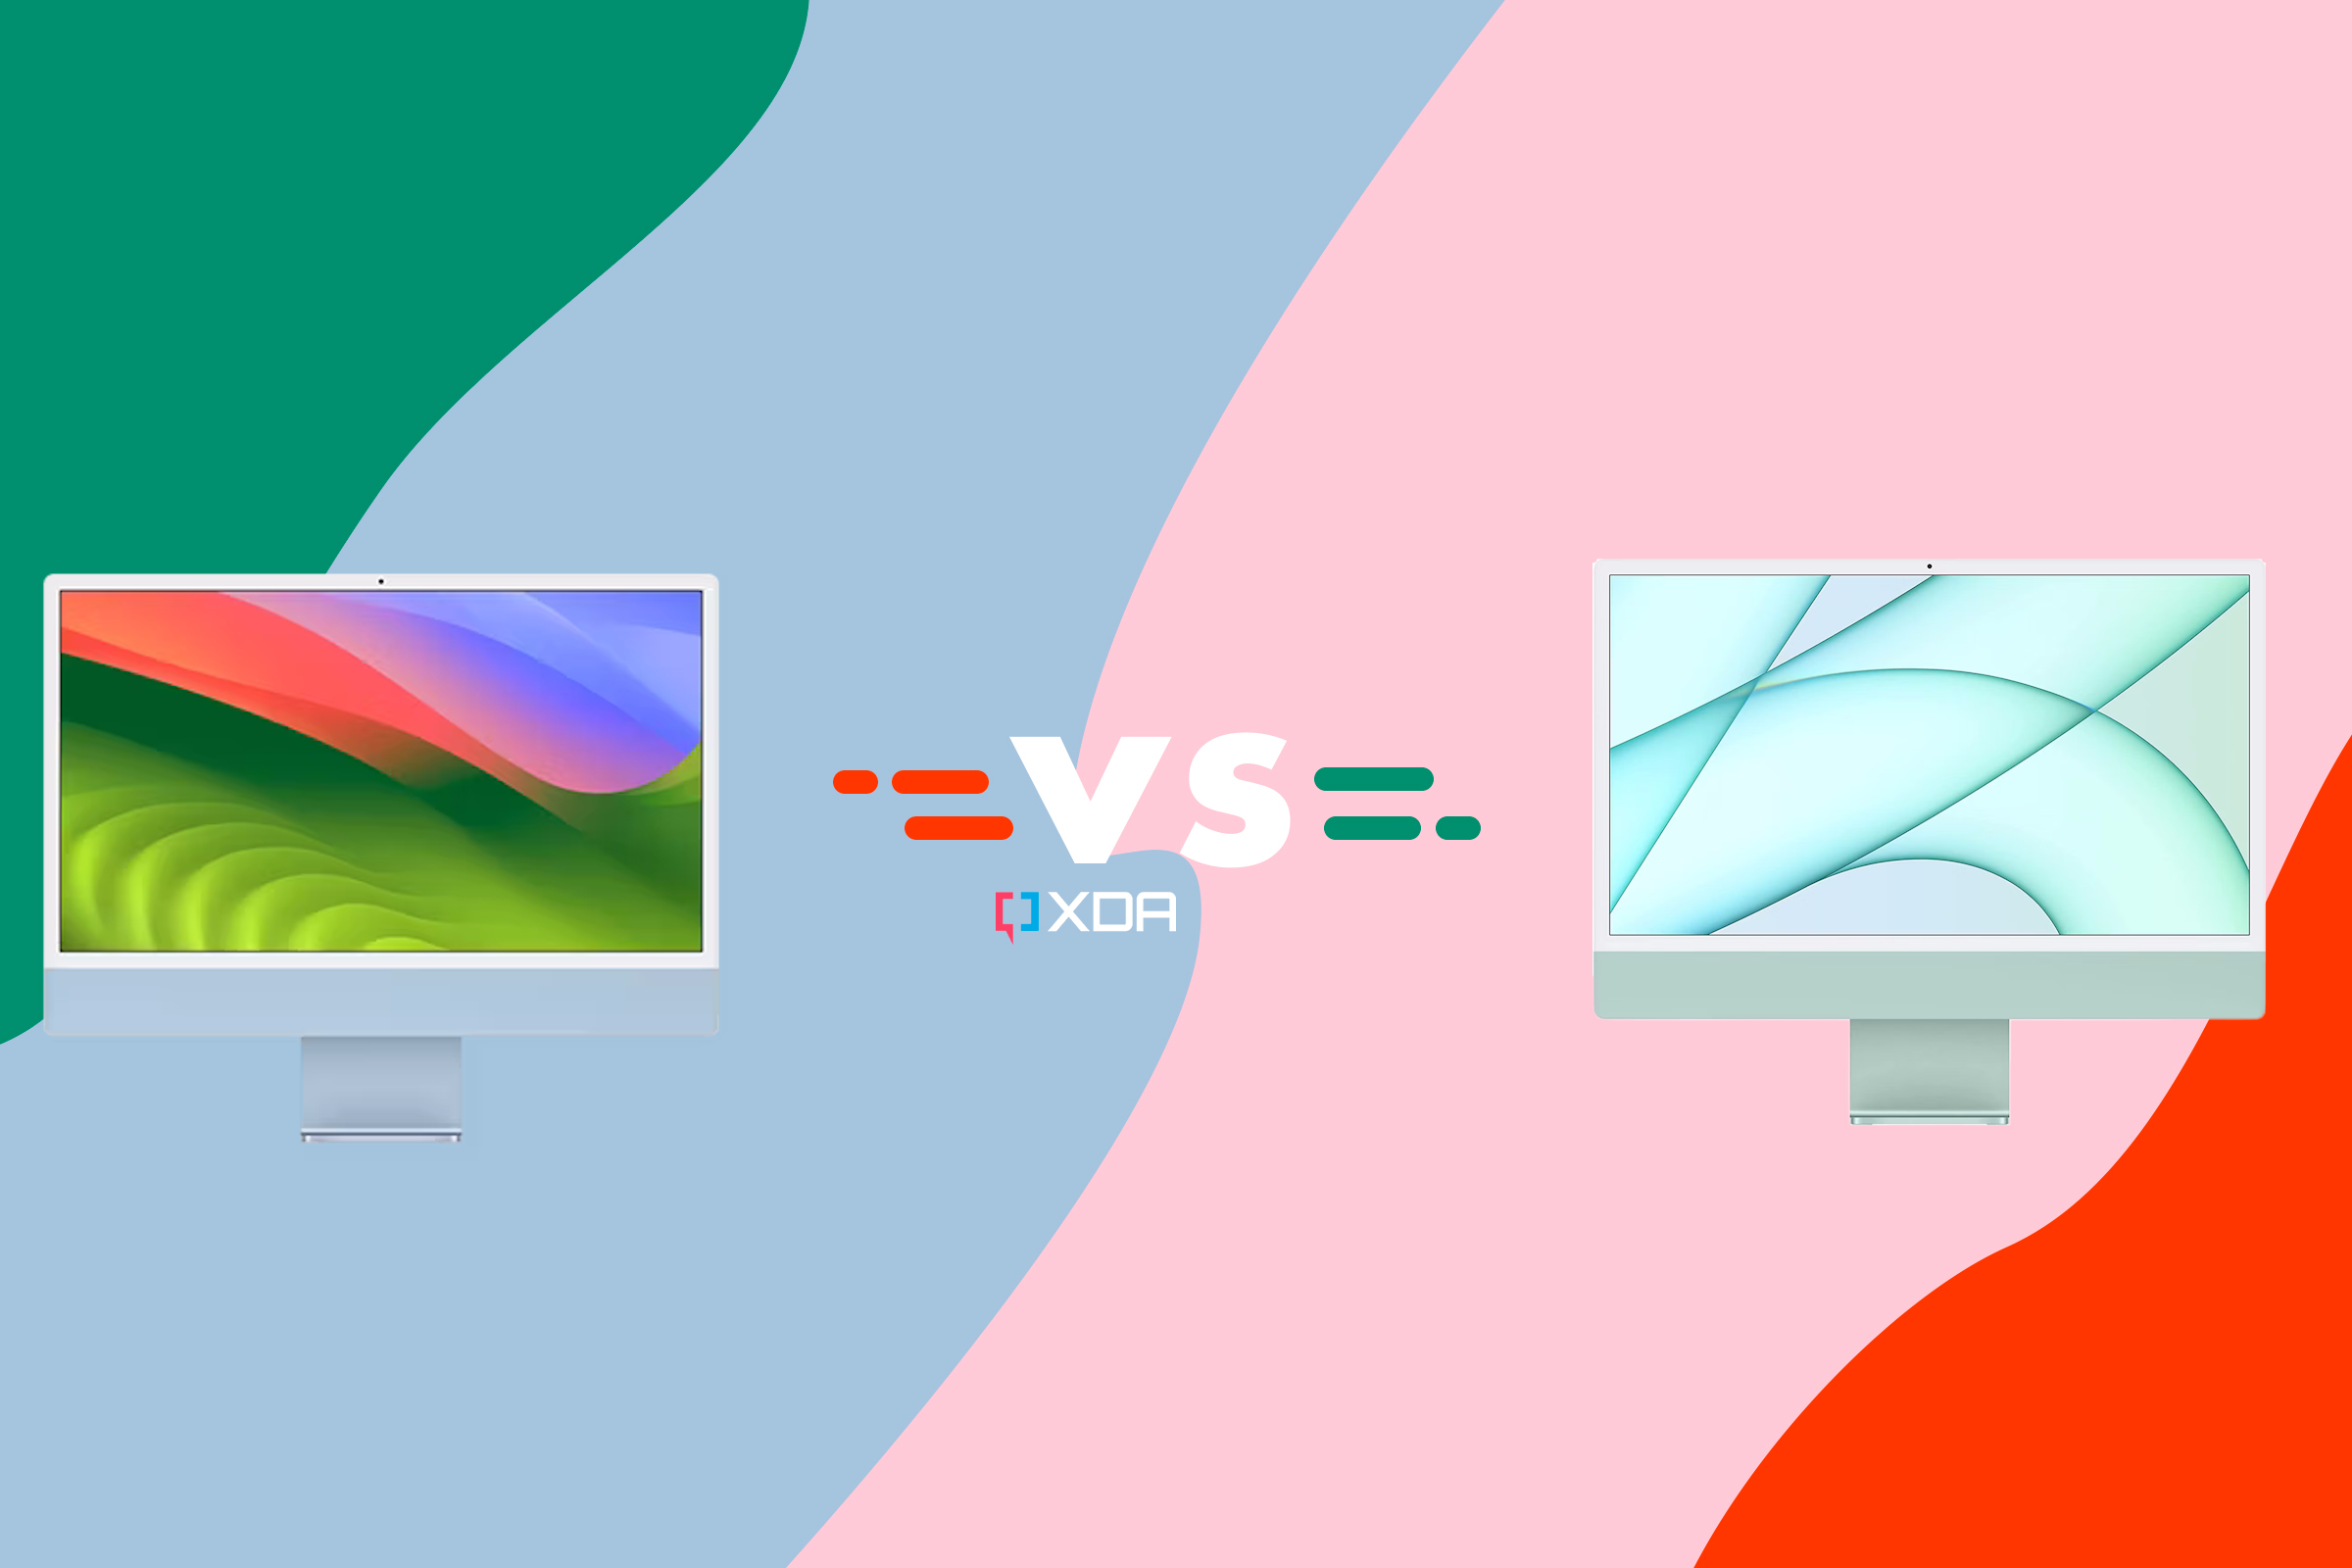 M3 vs M1 iMac: What is the difference?